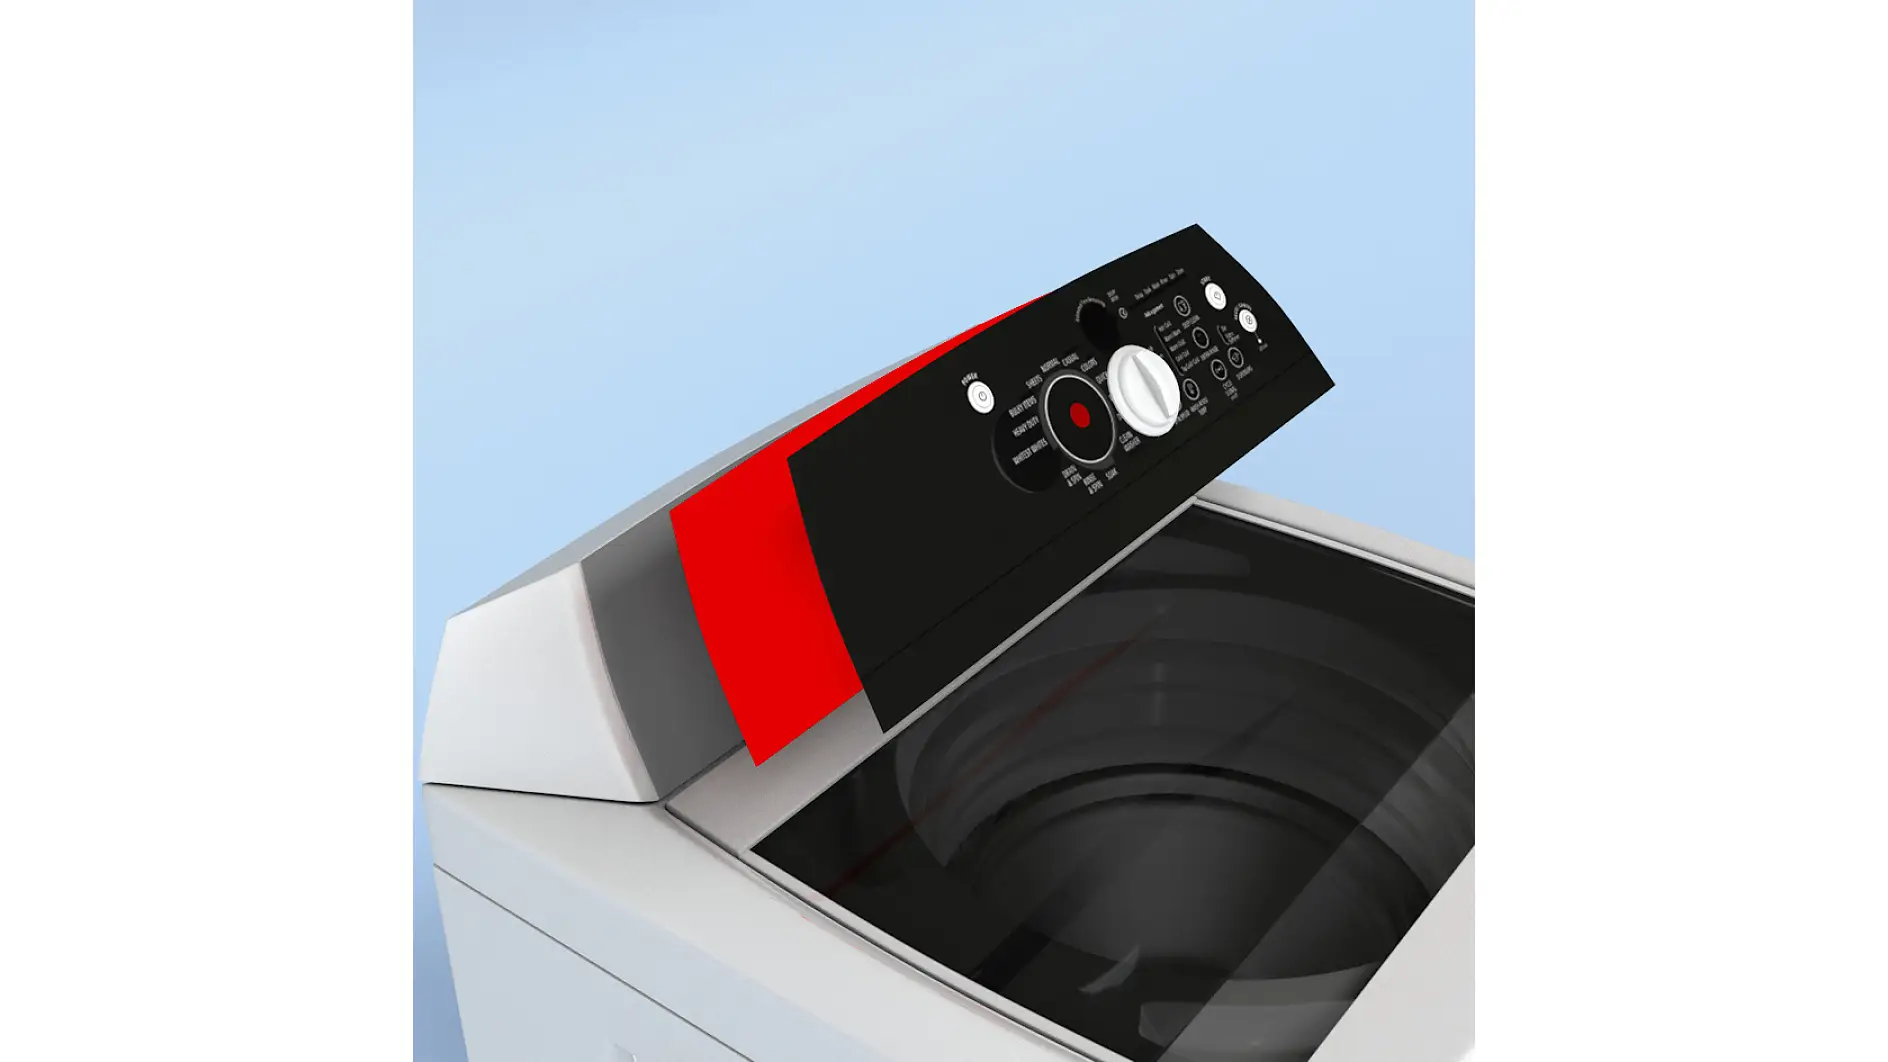 Membrane switches are mounted to a washing machine by using an adhesive tape